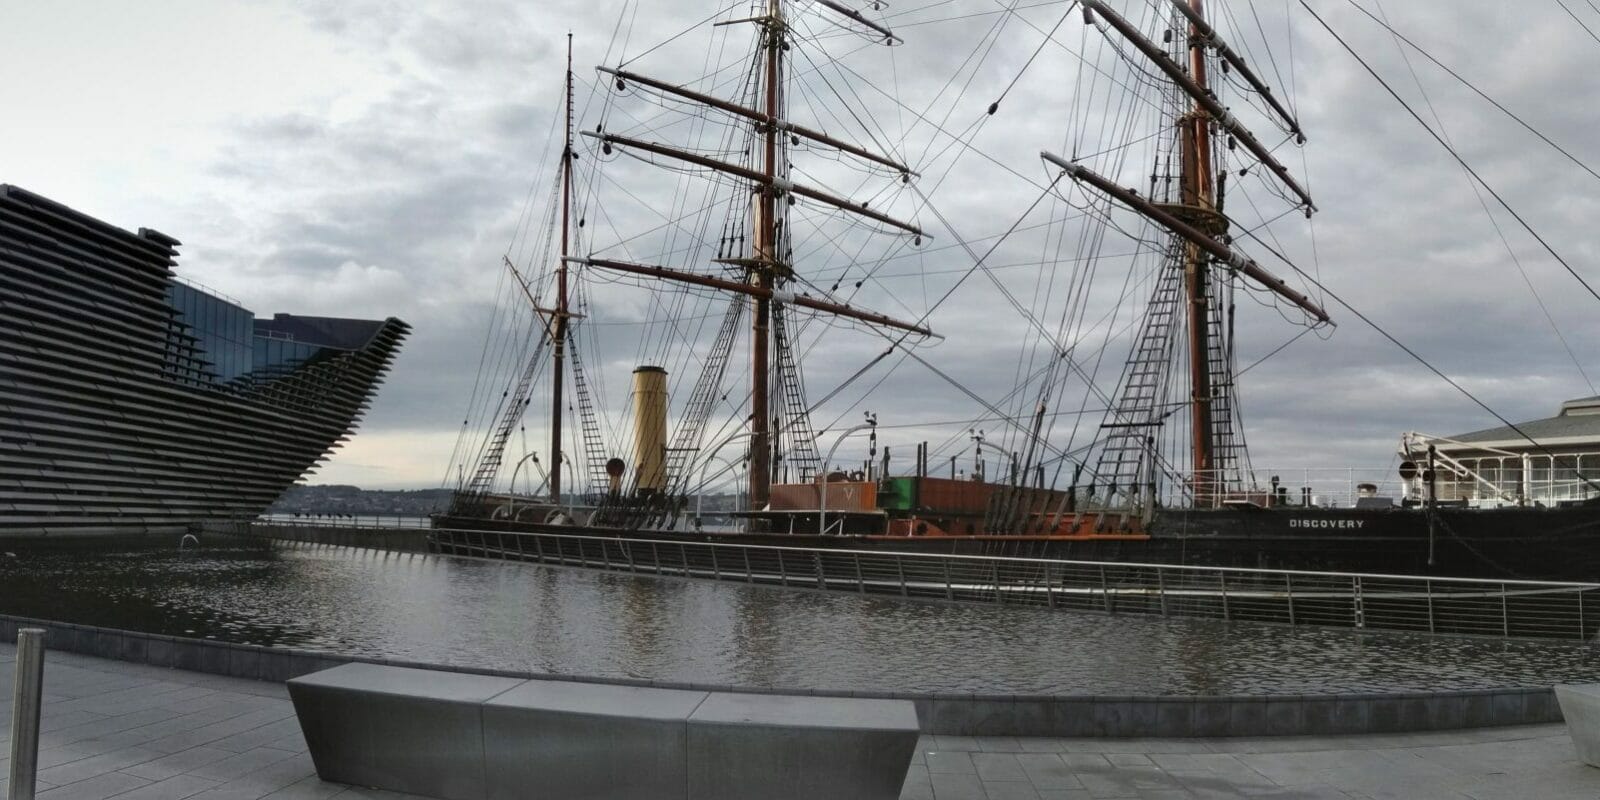 RSS Discovery and the V&A Museum